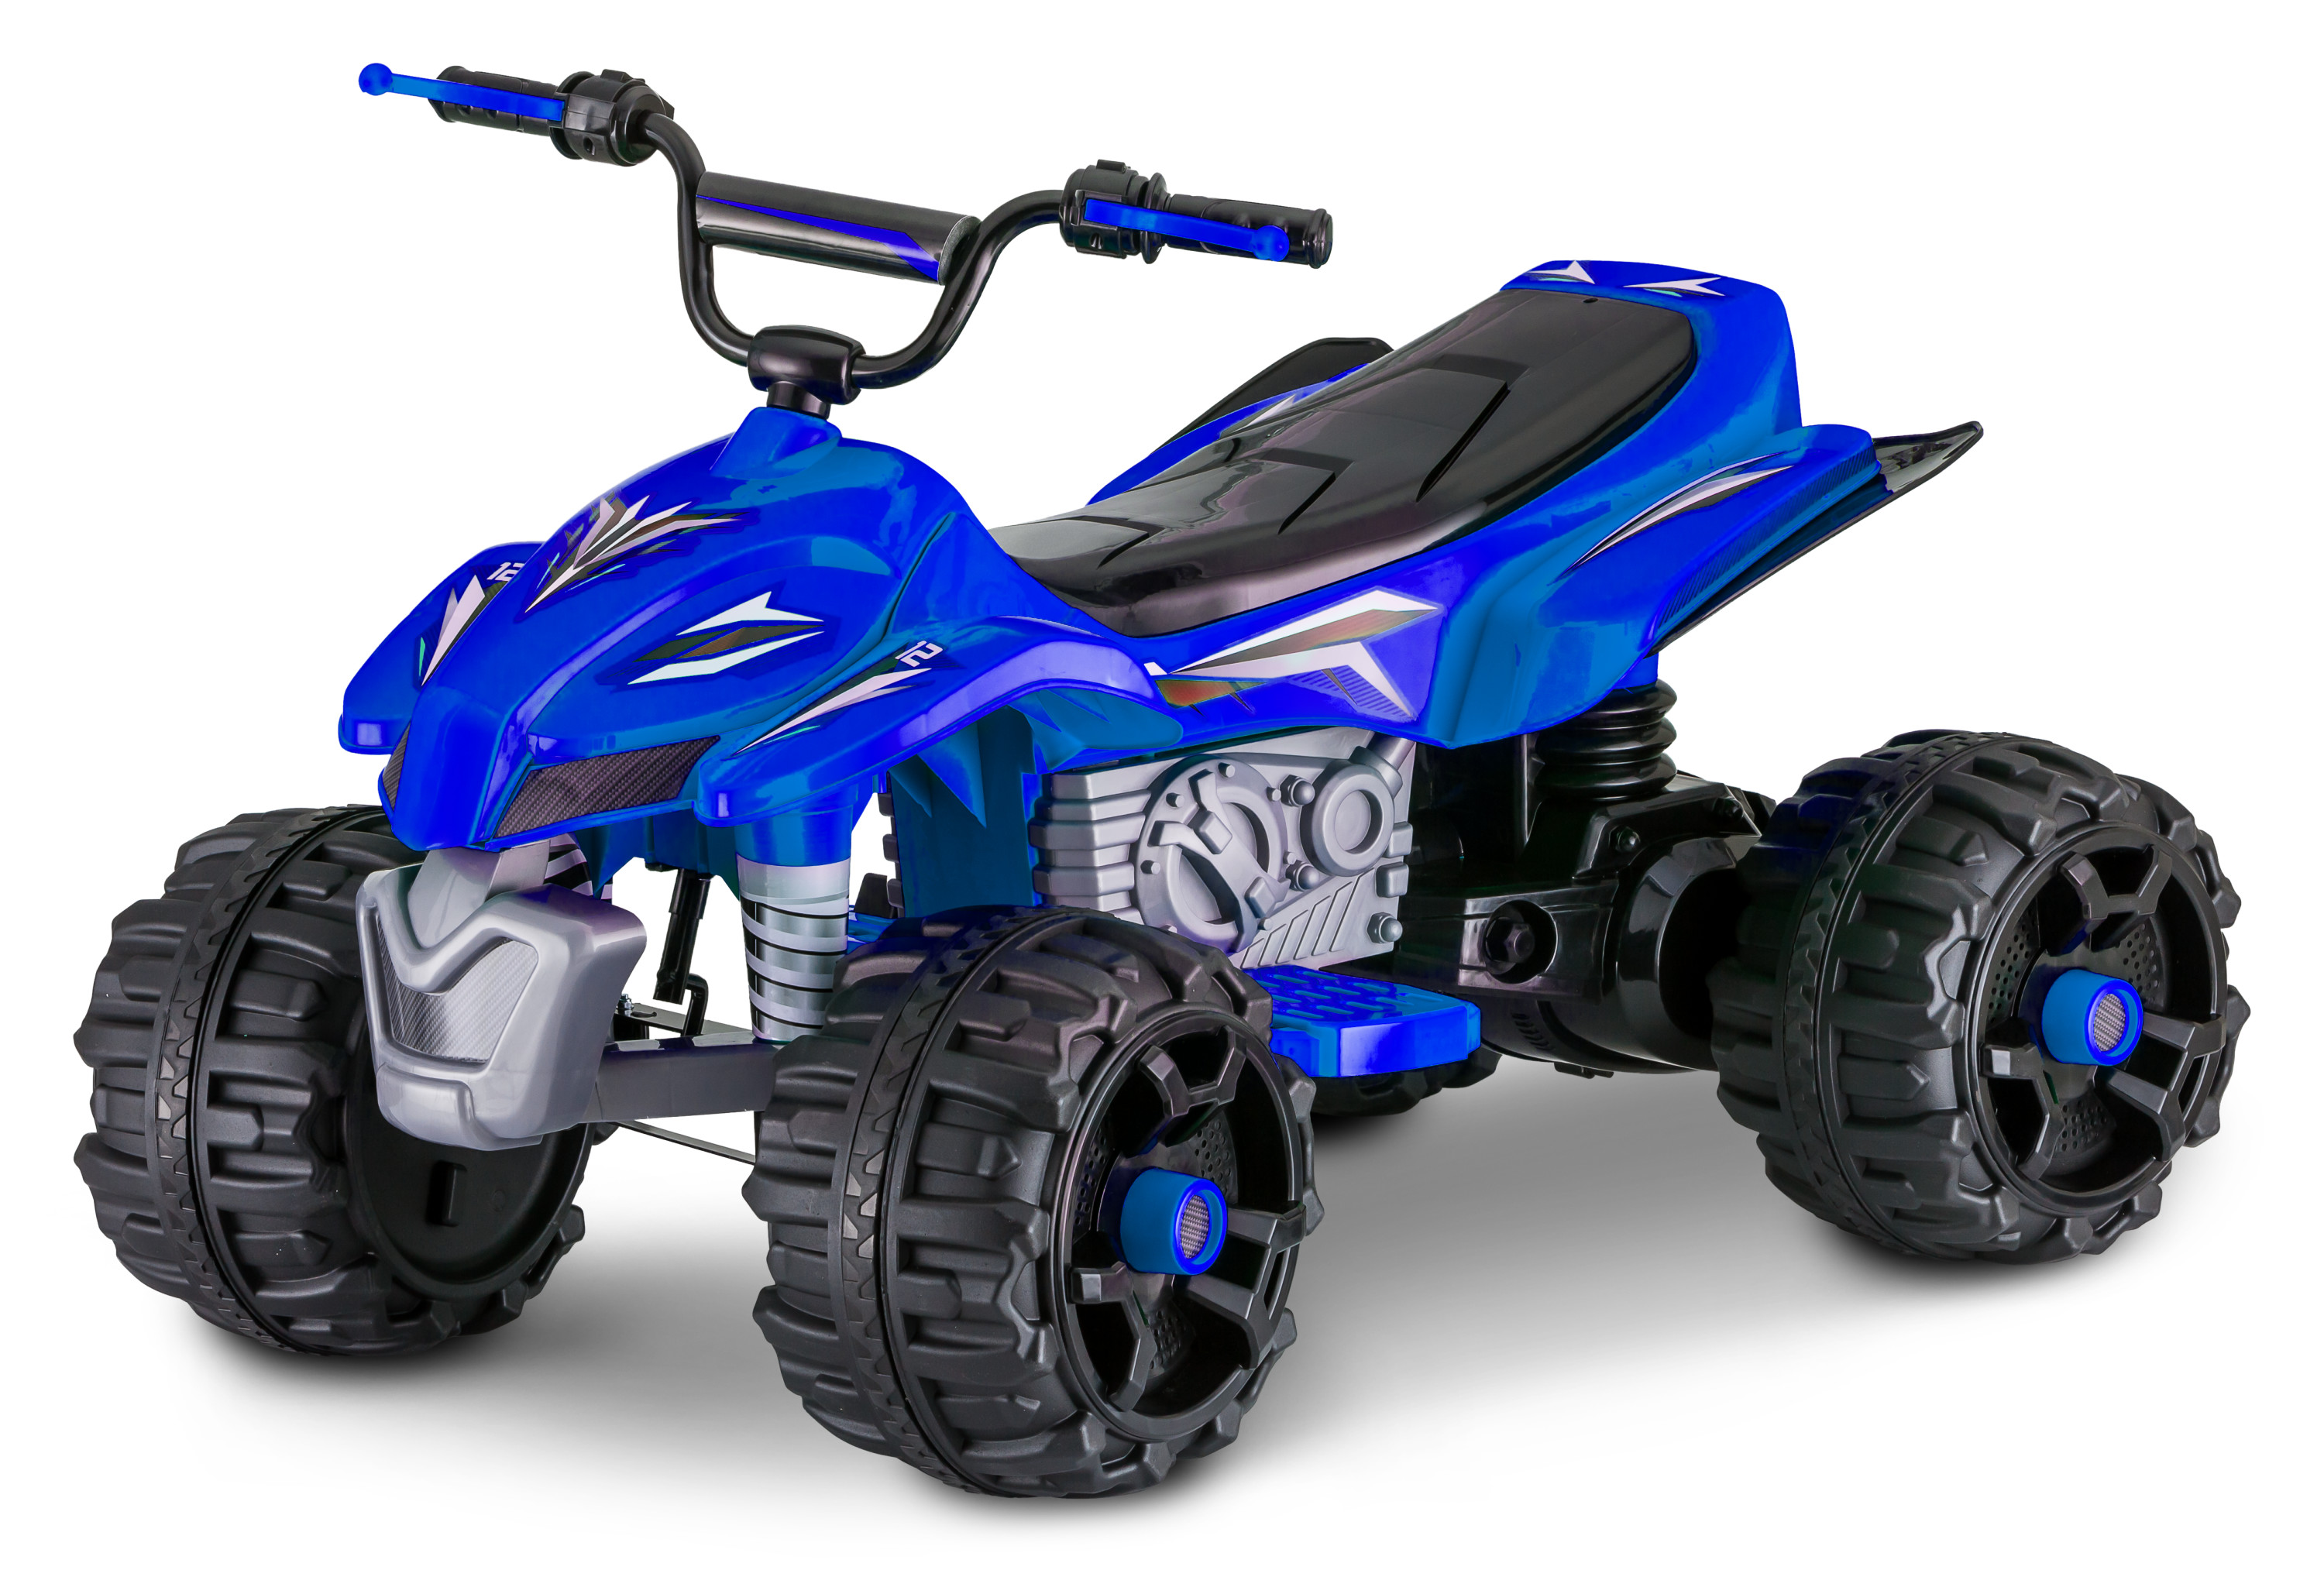 Sport ATV, 12-Volt Ride-On Toy by Kid Trax, ages 3+, blue - image 2 of 5